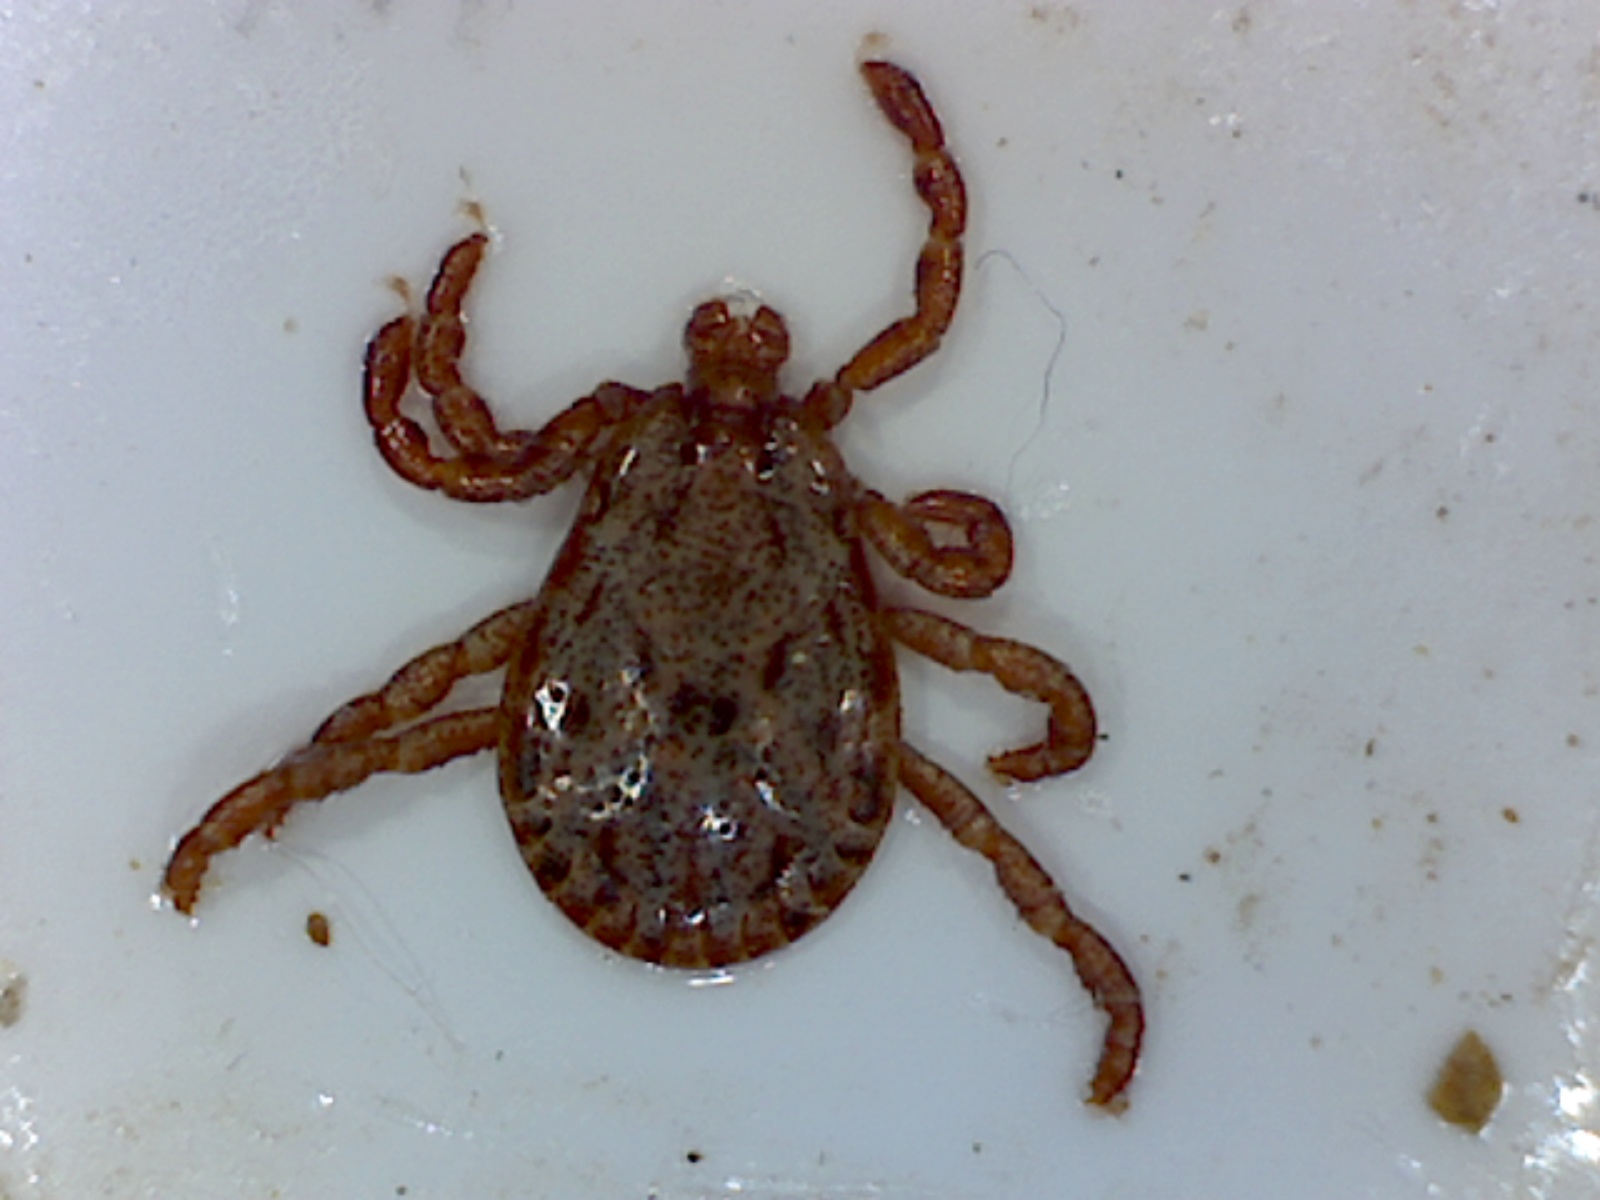 Male Pacific Coast Tick - Foothill Sierra Pest Control